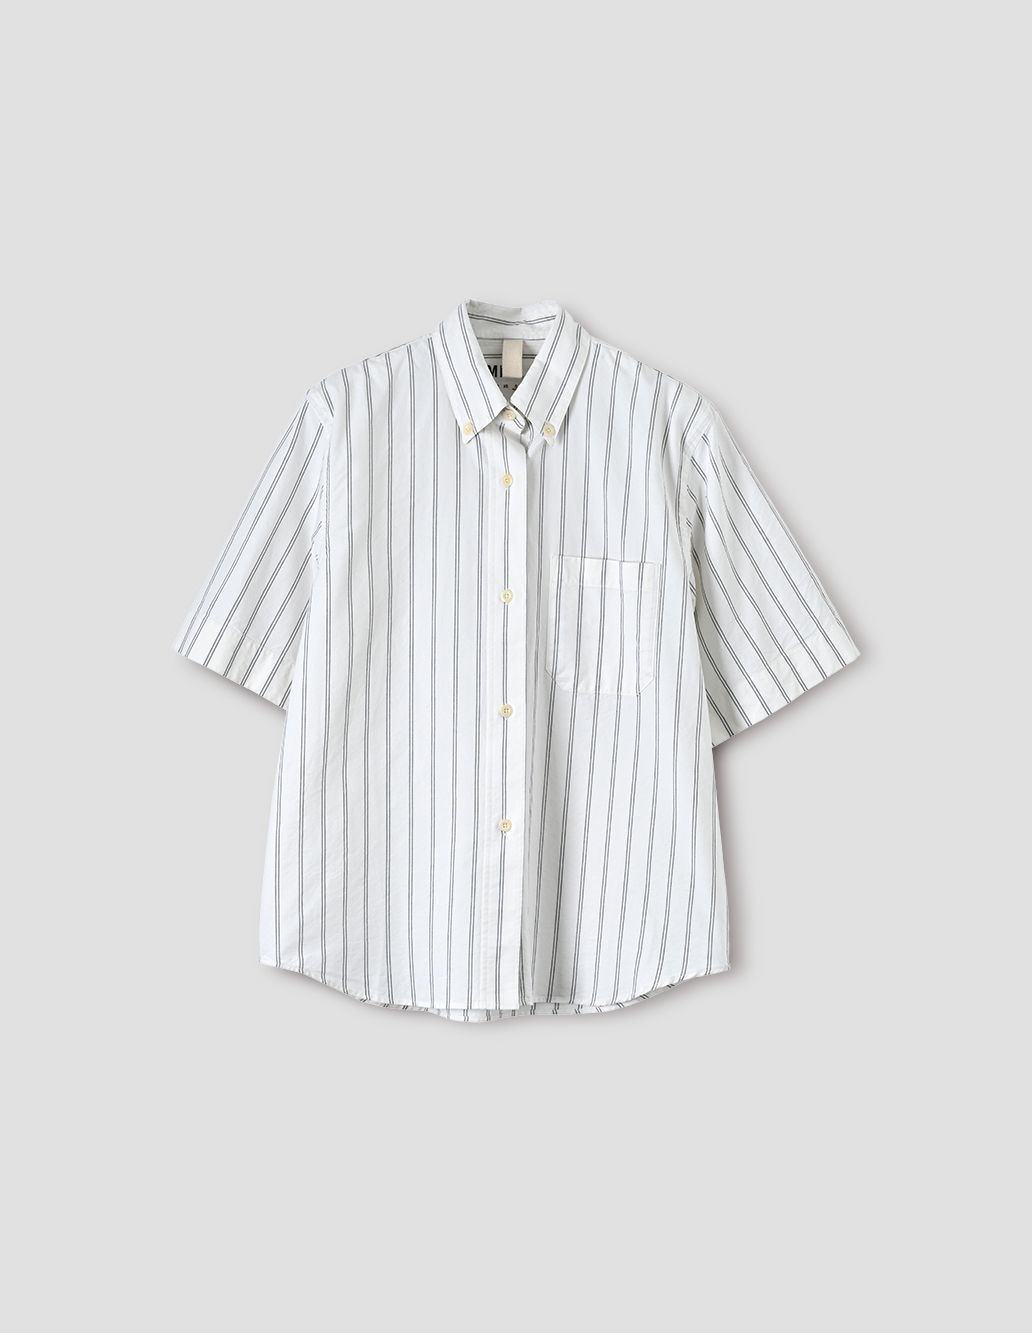 MARGARET HOWELL - Off white and grey canvas shirt | MHL. by Margaret Howell